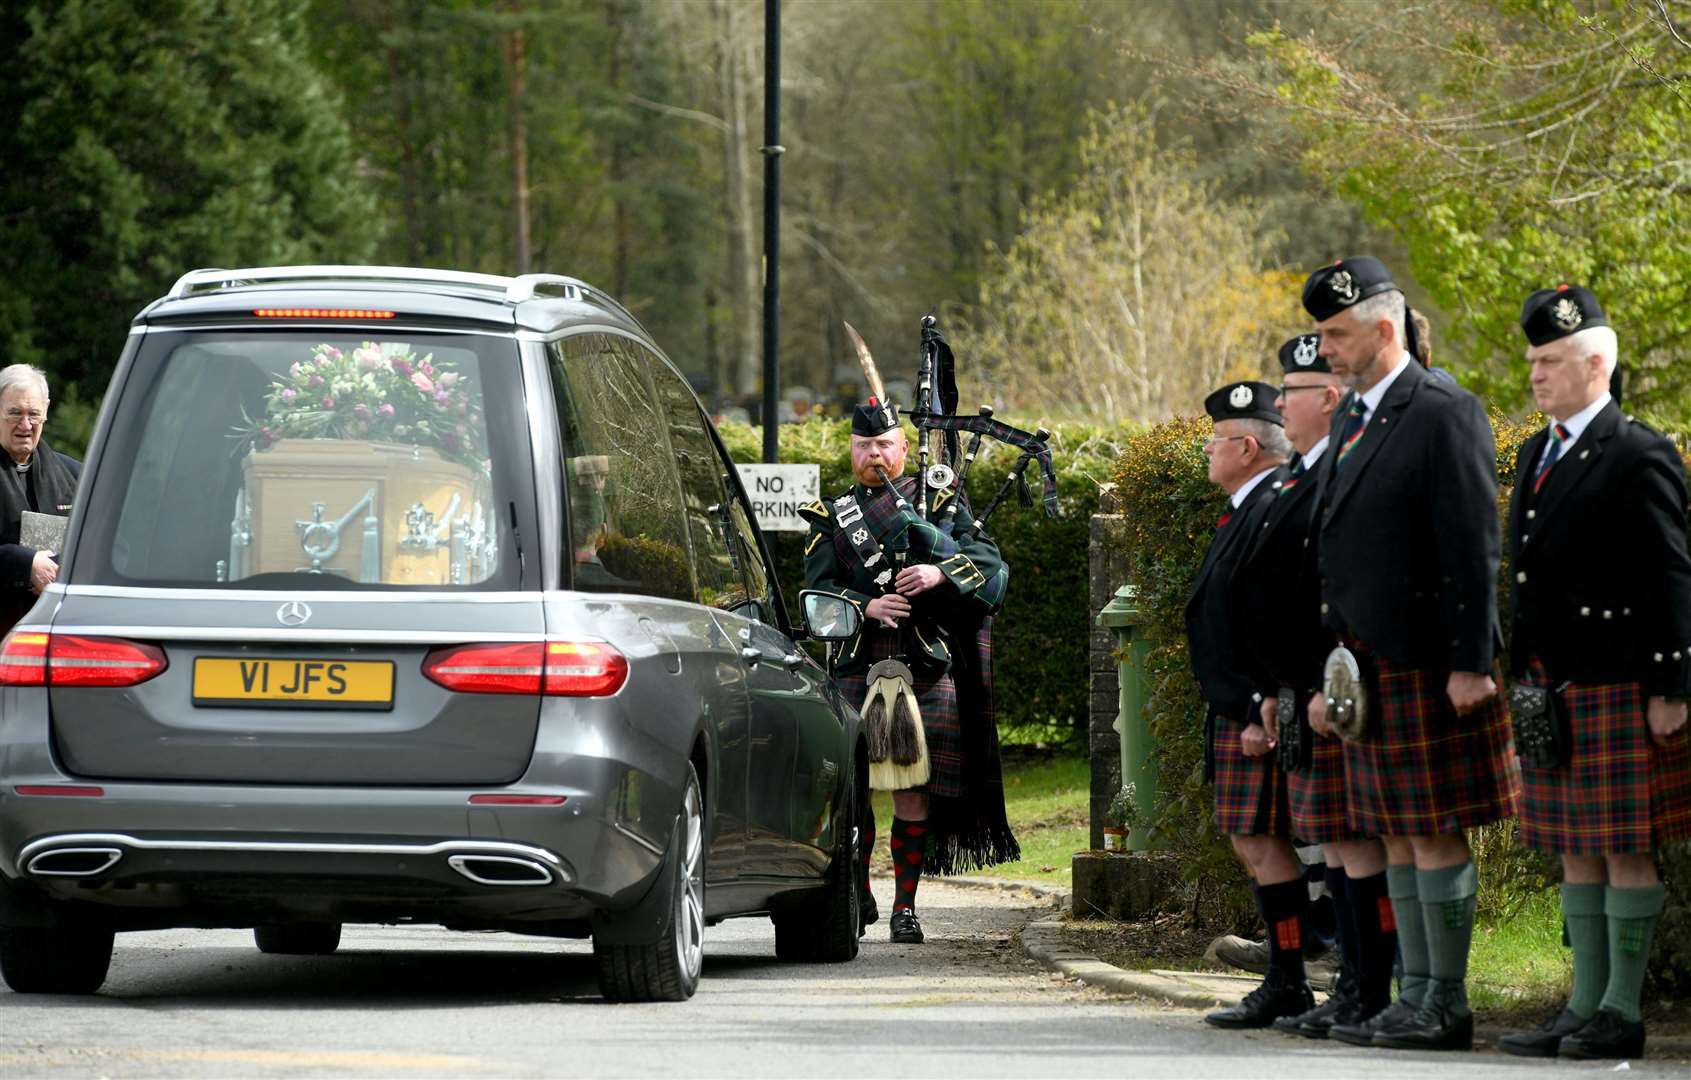 Pipers pay their respects as the funeral procession arrives at Kilvean Cemetery.